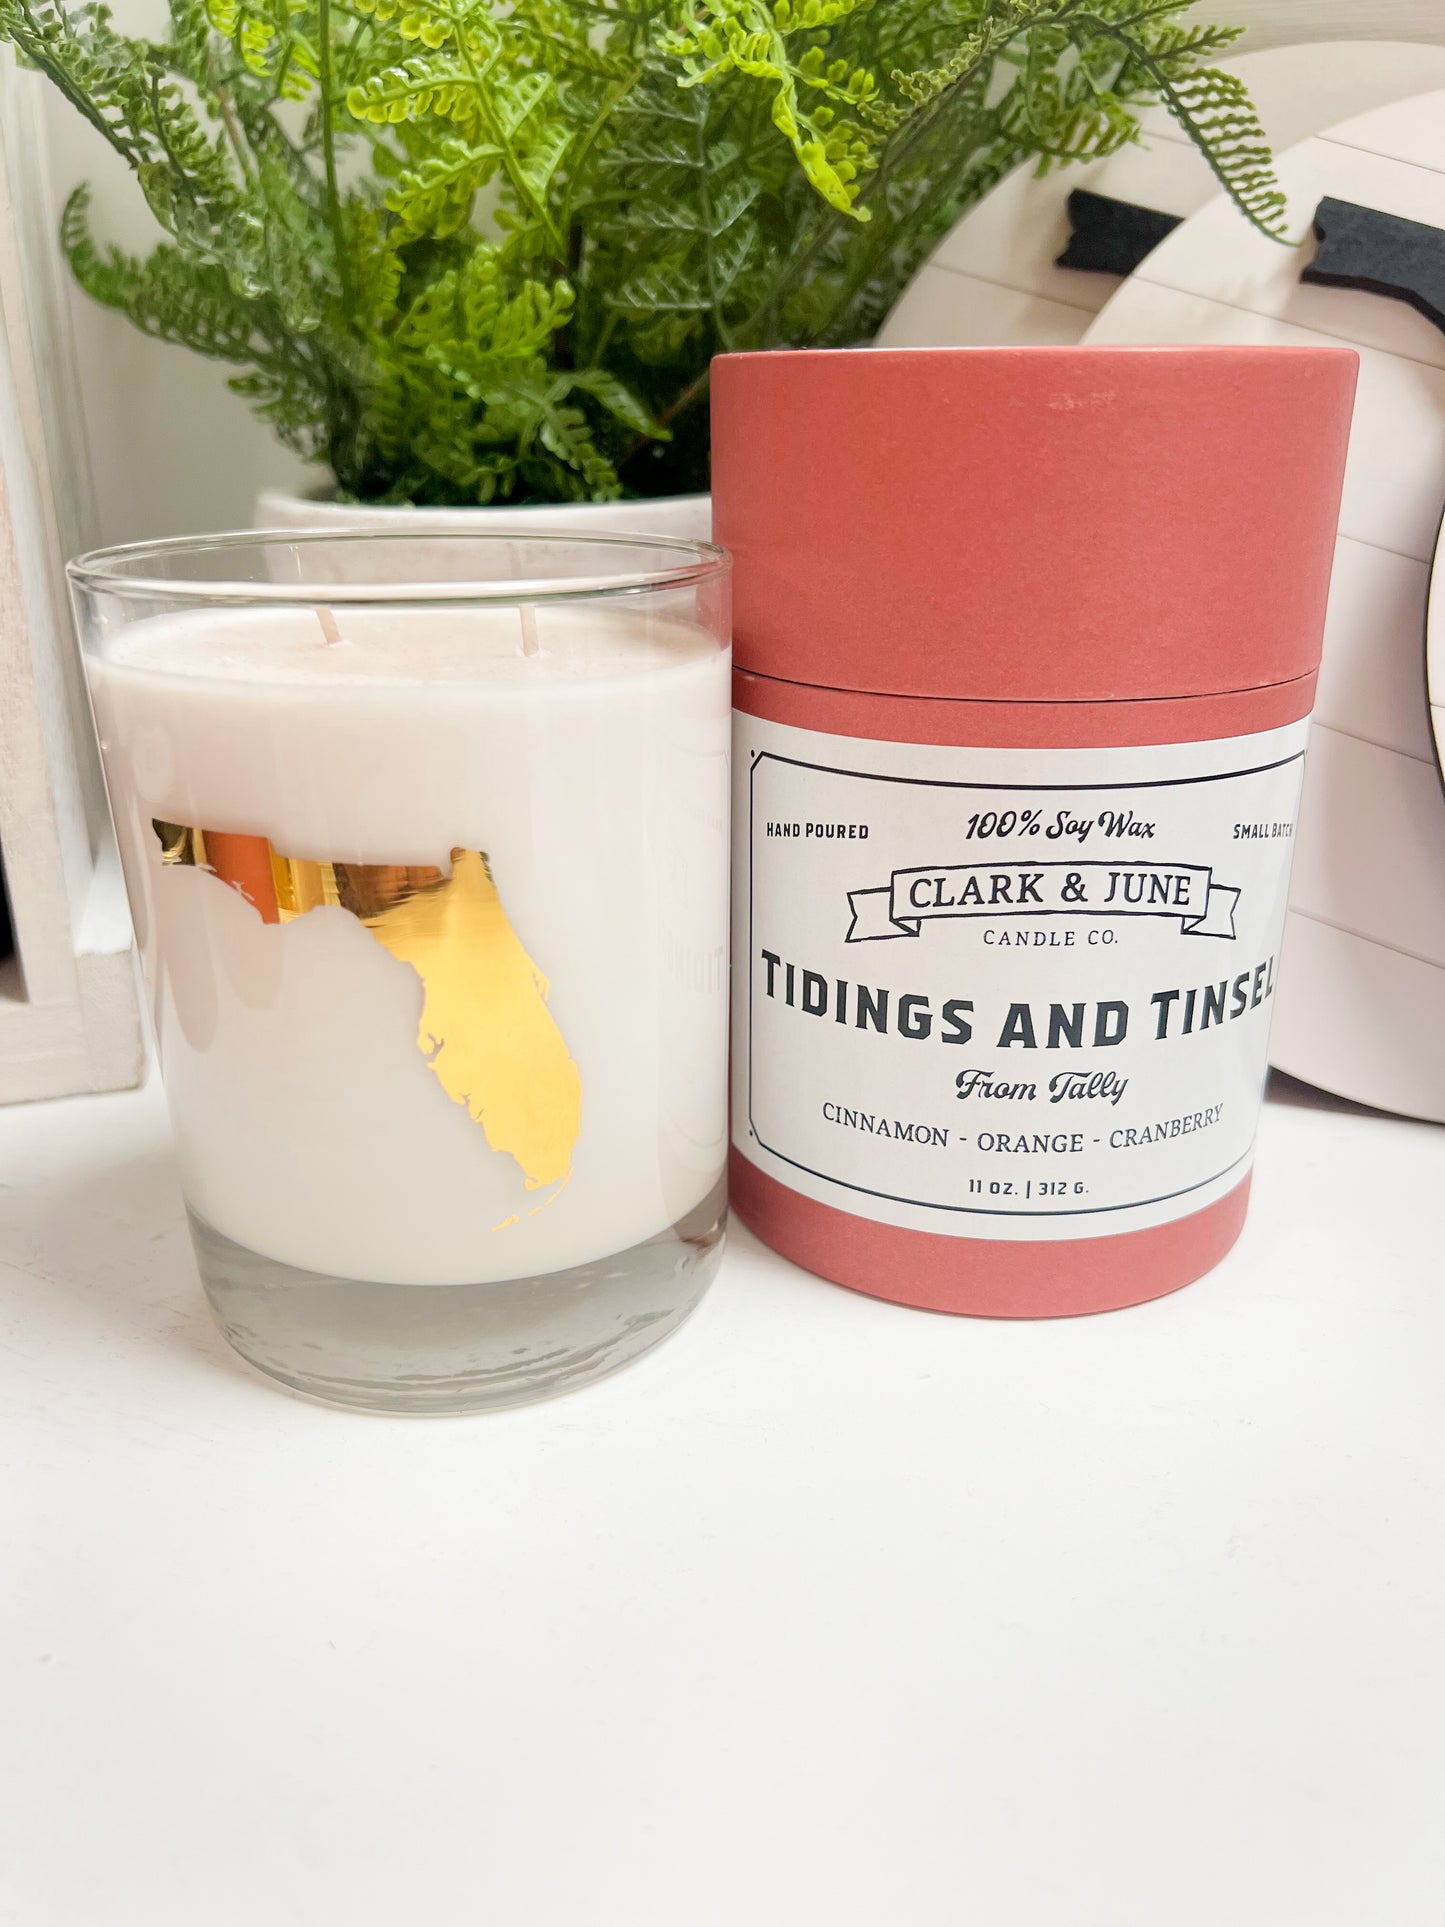 Tidings and Tinsel Candle